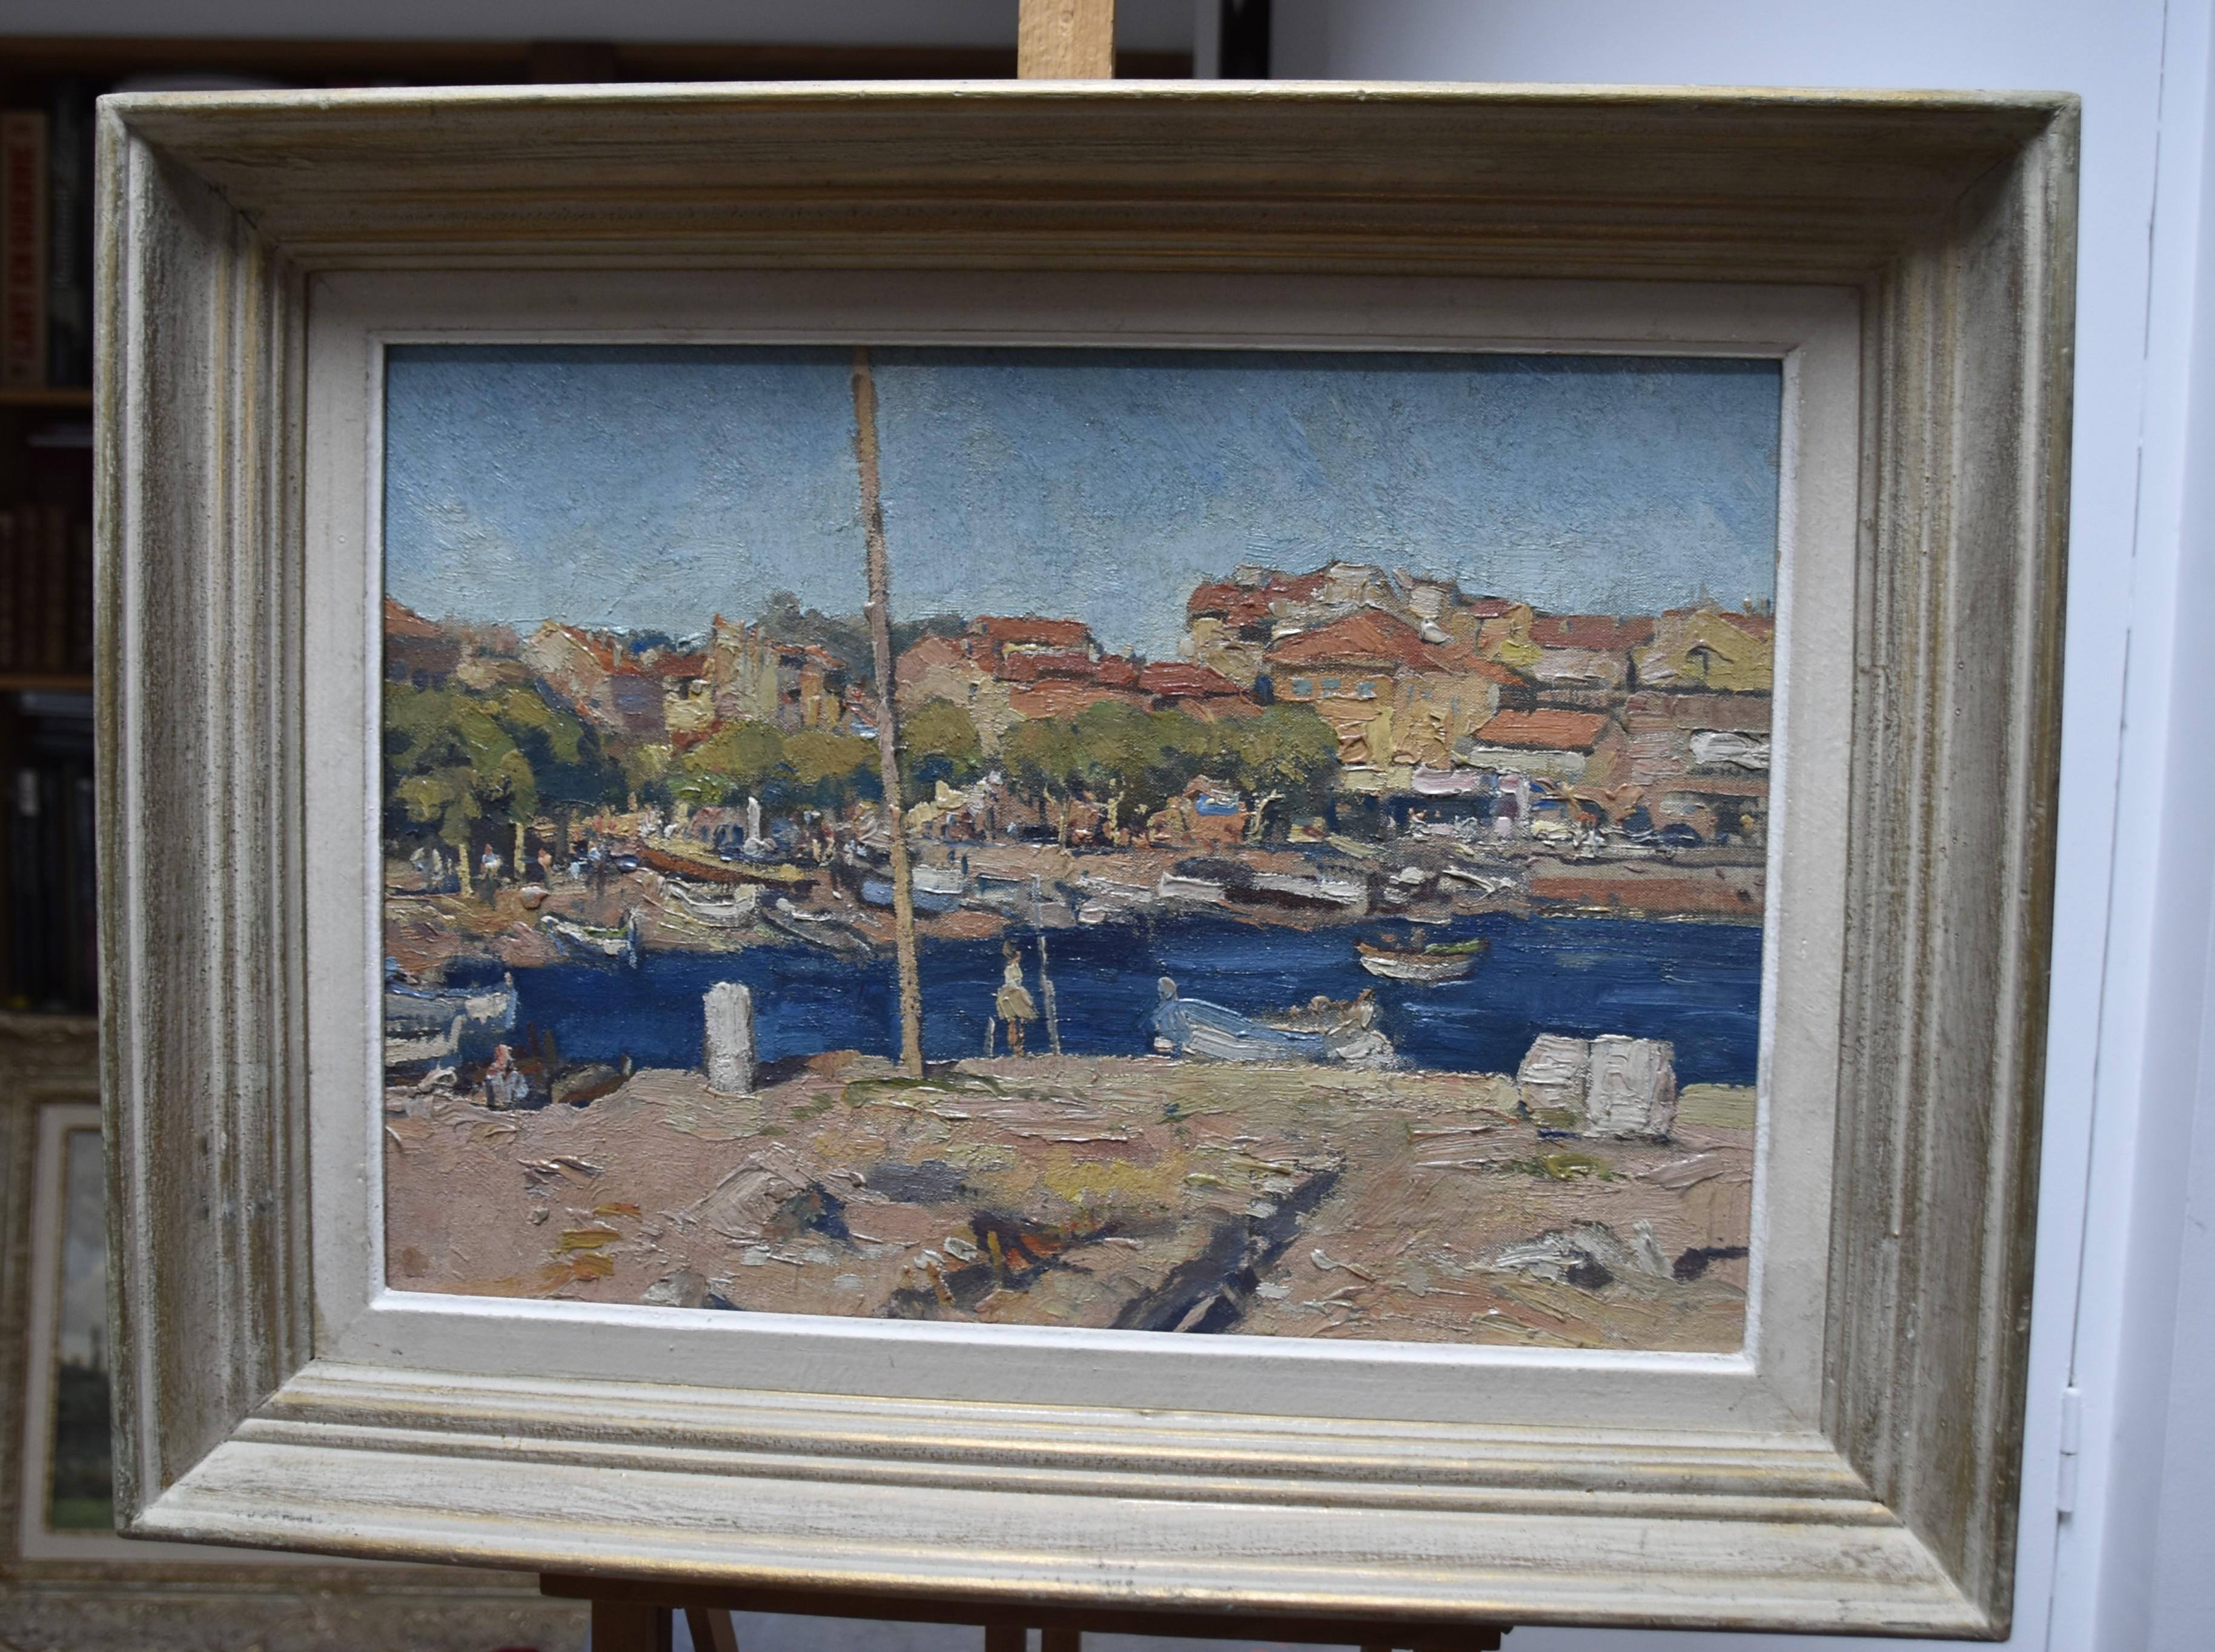 French school 20th century, 
A Port in Southern France, 
oil on canvas transfered on wood panel
33 x 45 cm
In good condition
In its original frame : 45 x 58 cm

